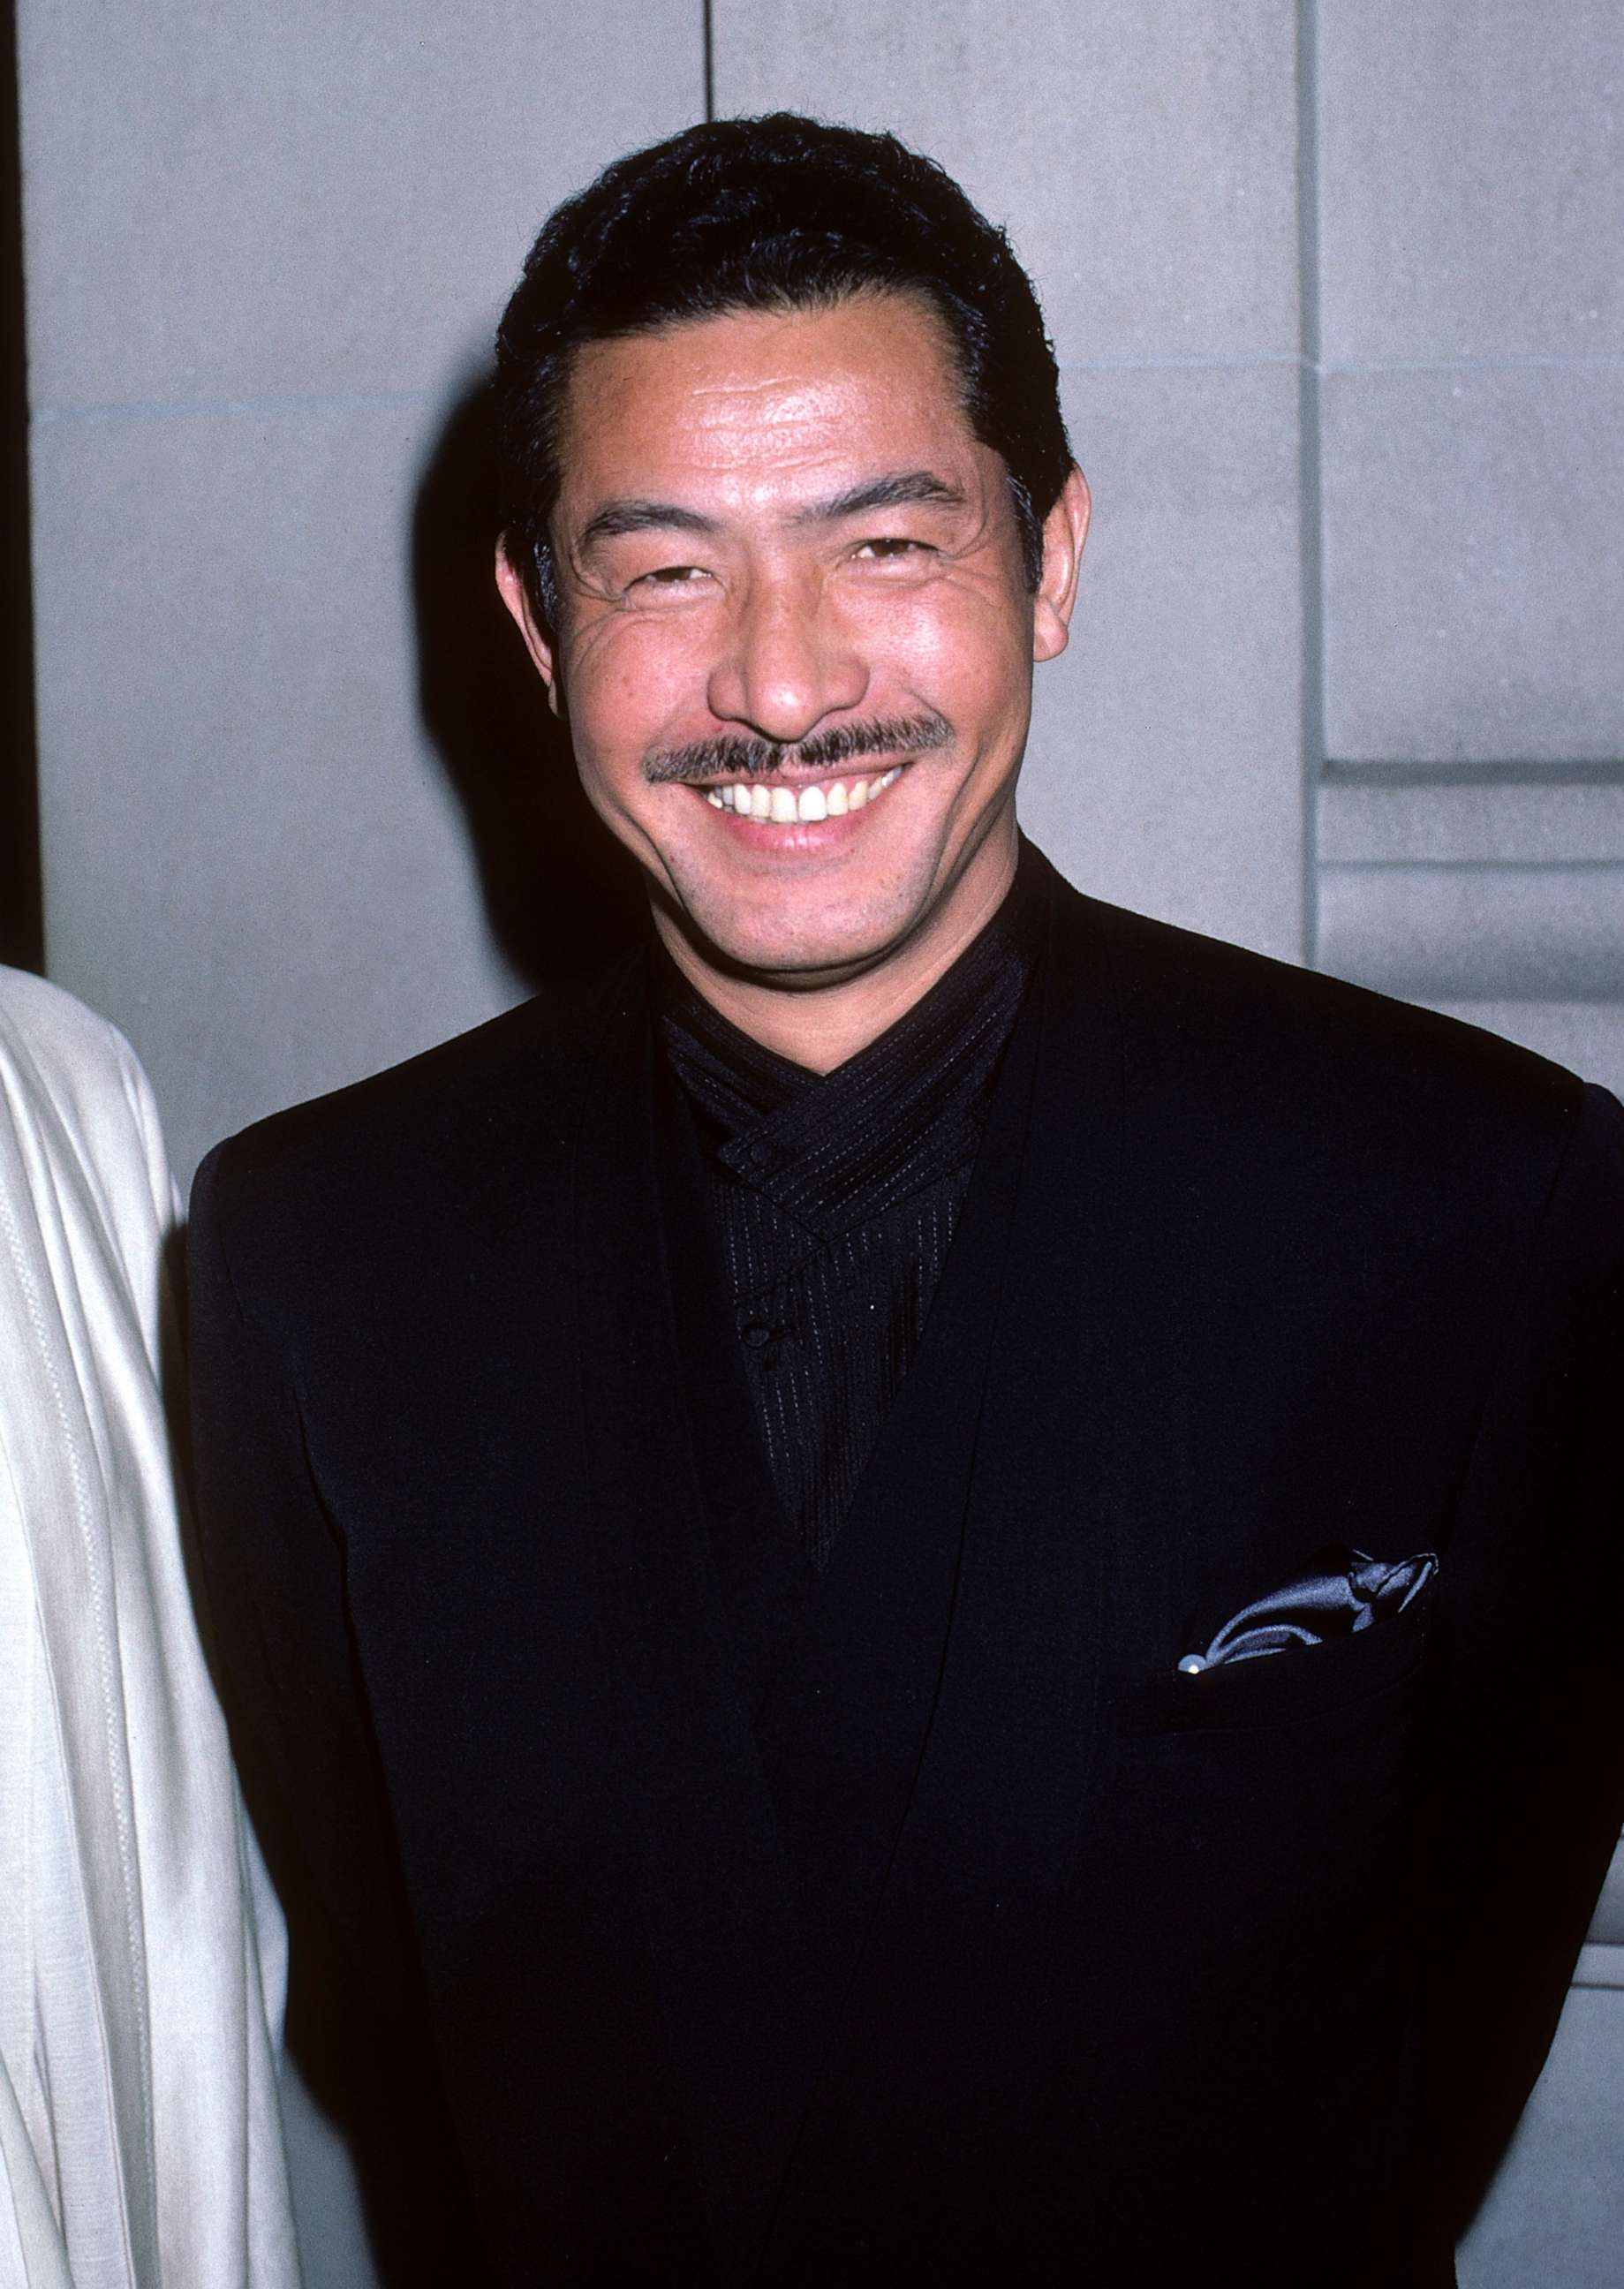 PHOTO: Issey Miyake attends the Metropolitan Museum of Art's Costume Institute Gala Exhibition, Dec. 8, 1986, at the Metropolitan Museum of Art in New York.